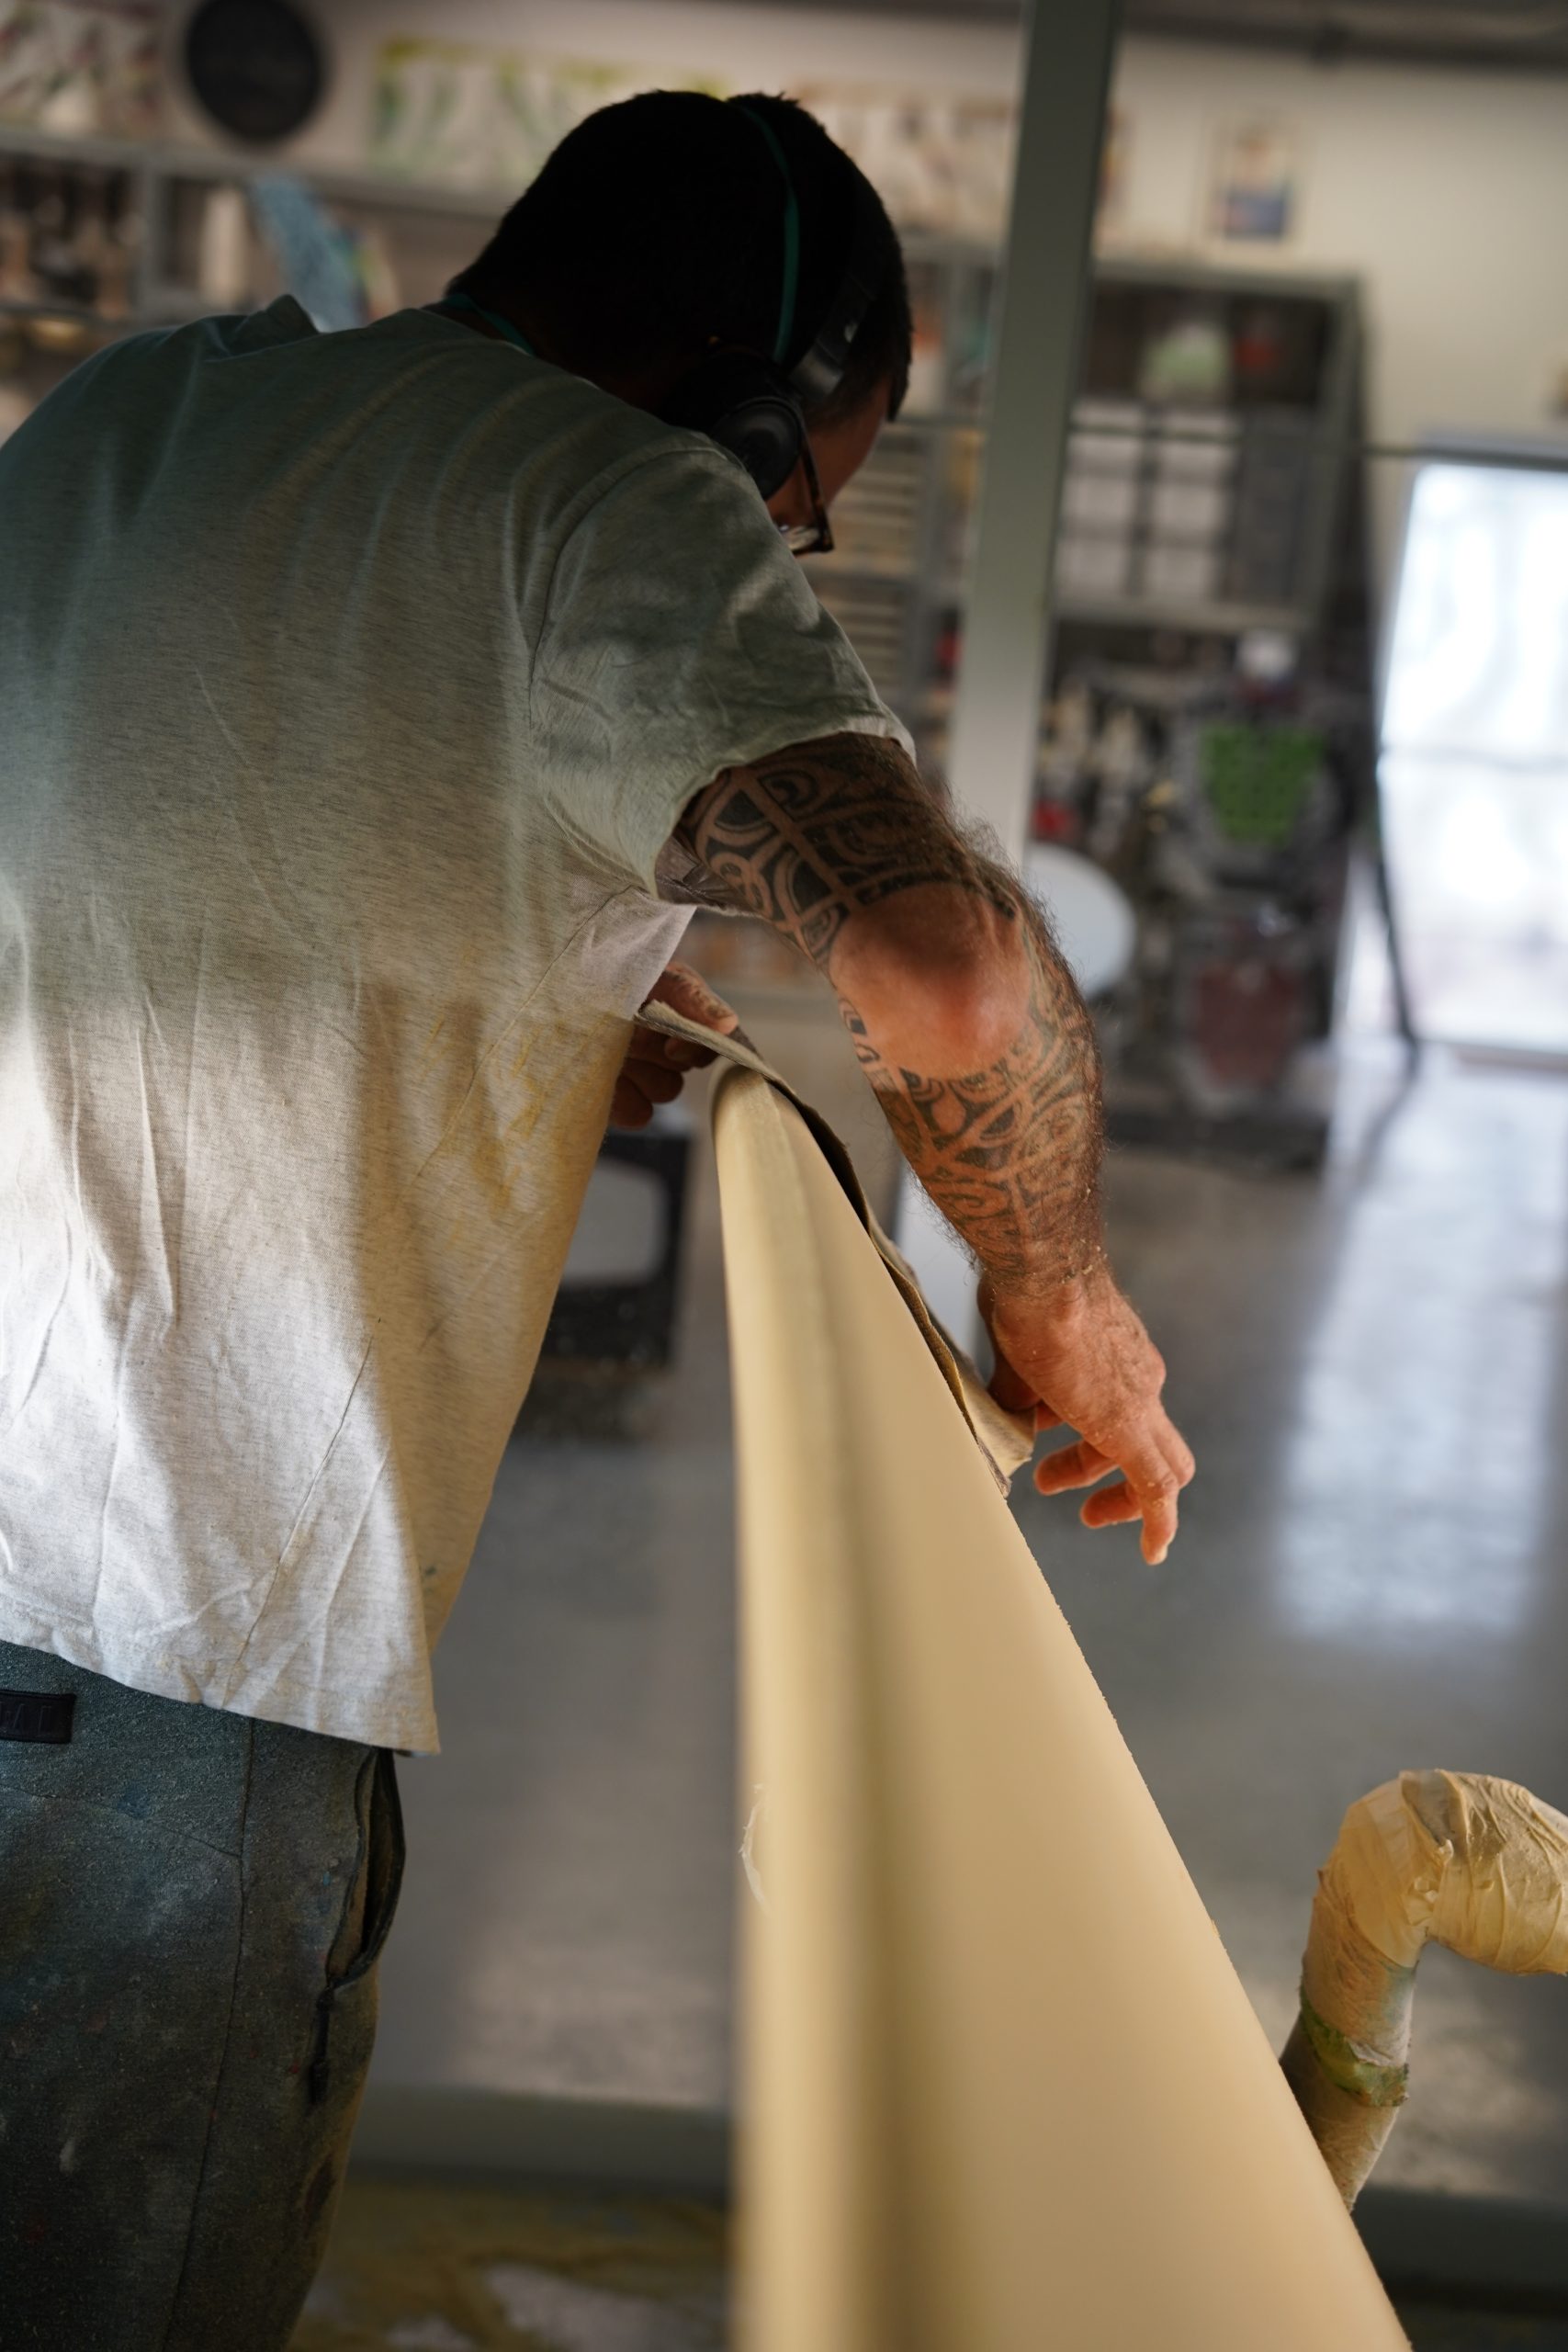 Shaper using sandpaper working on the rail of the surfboard